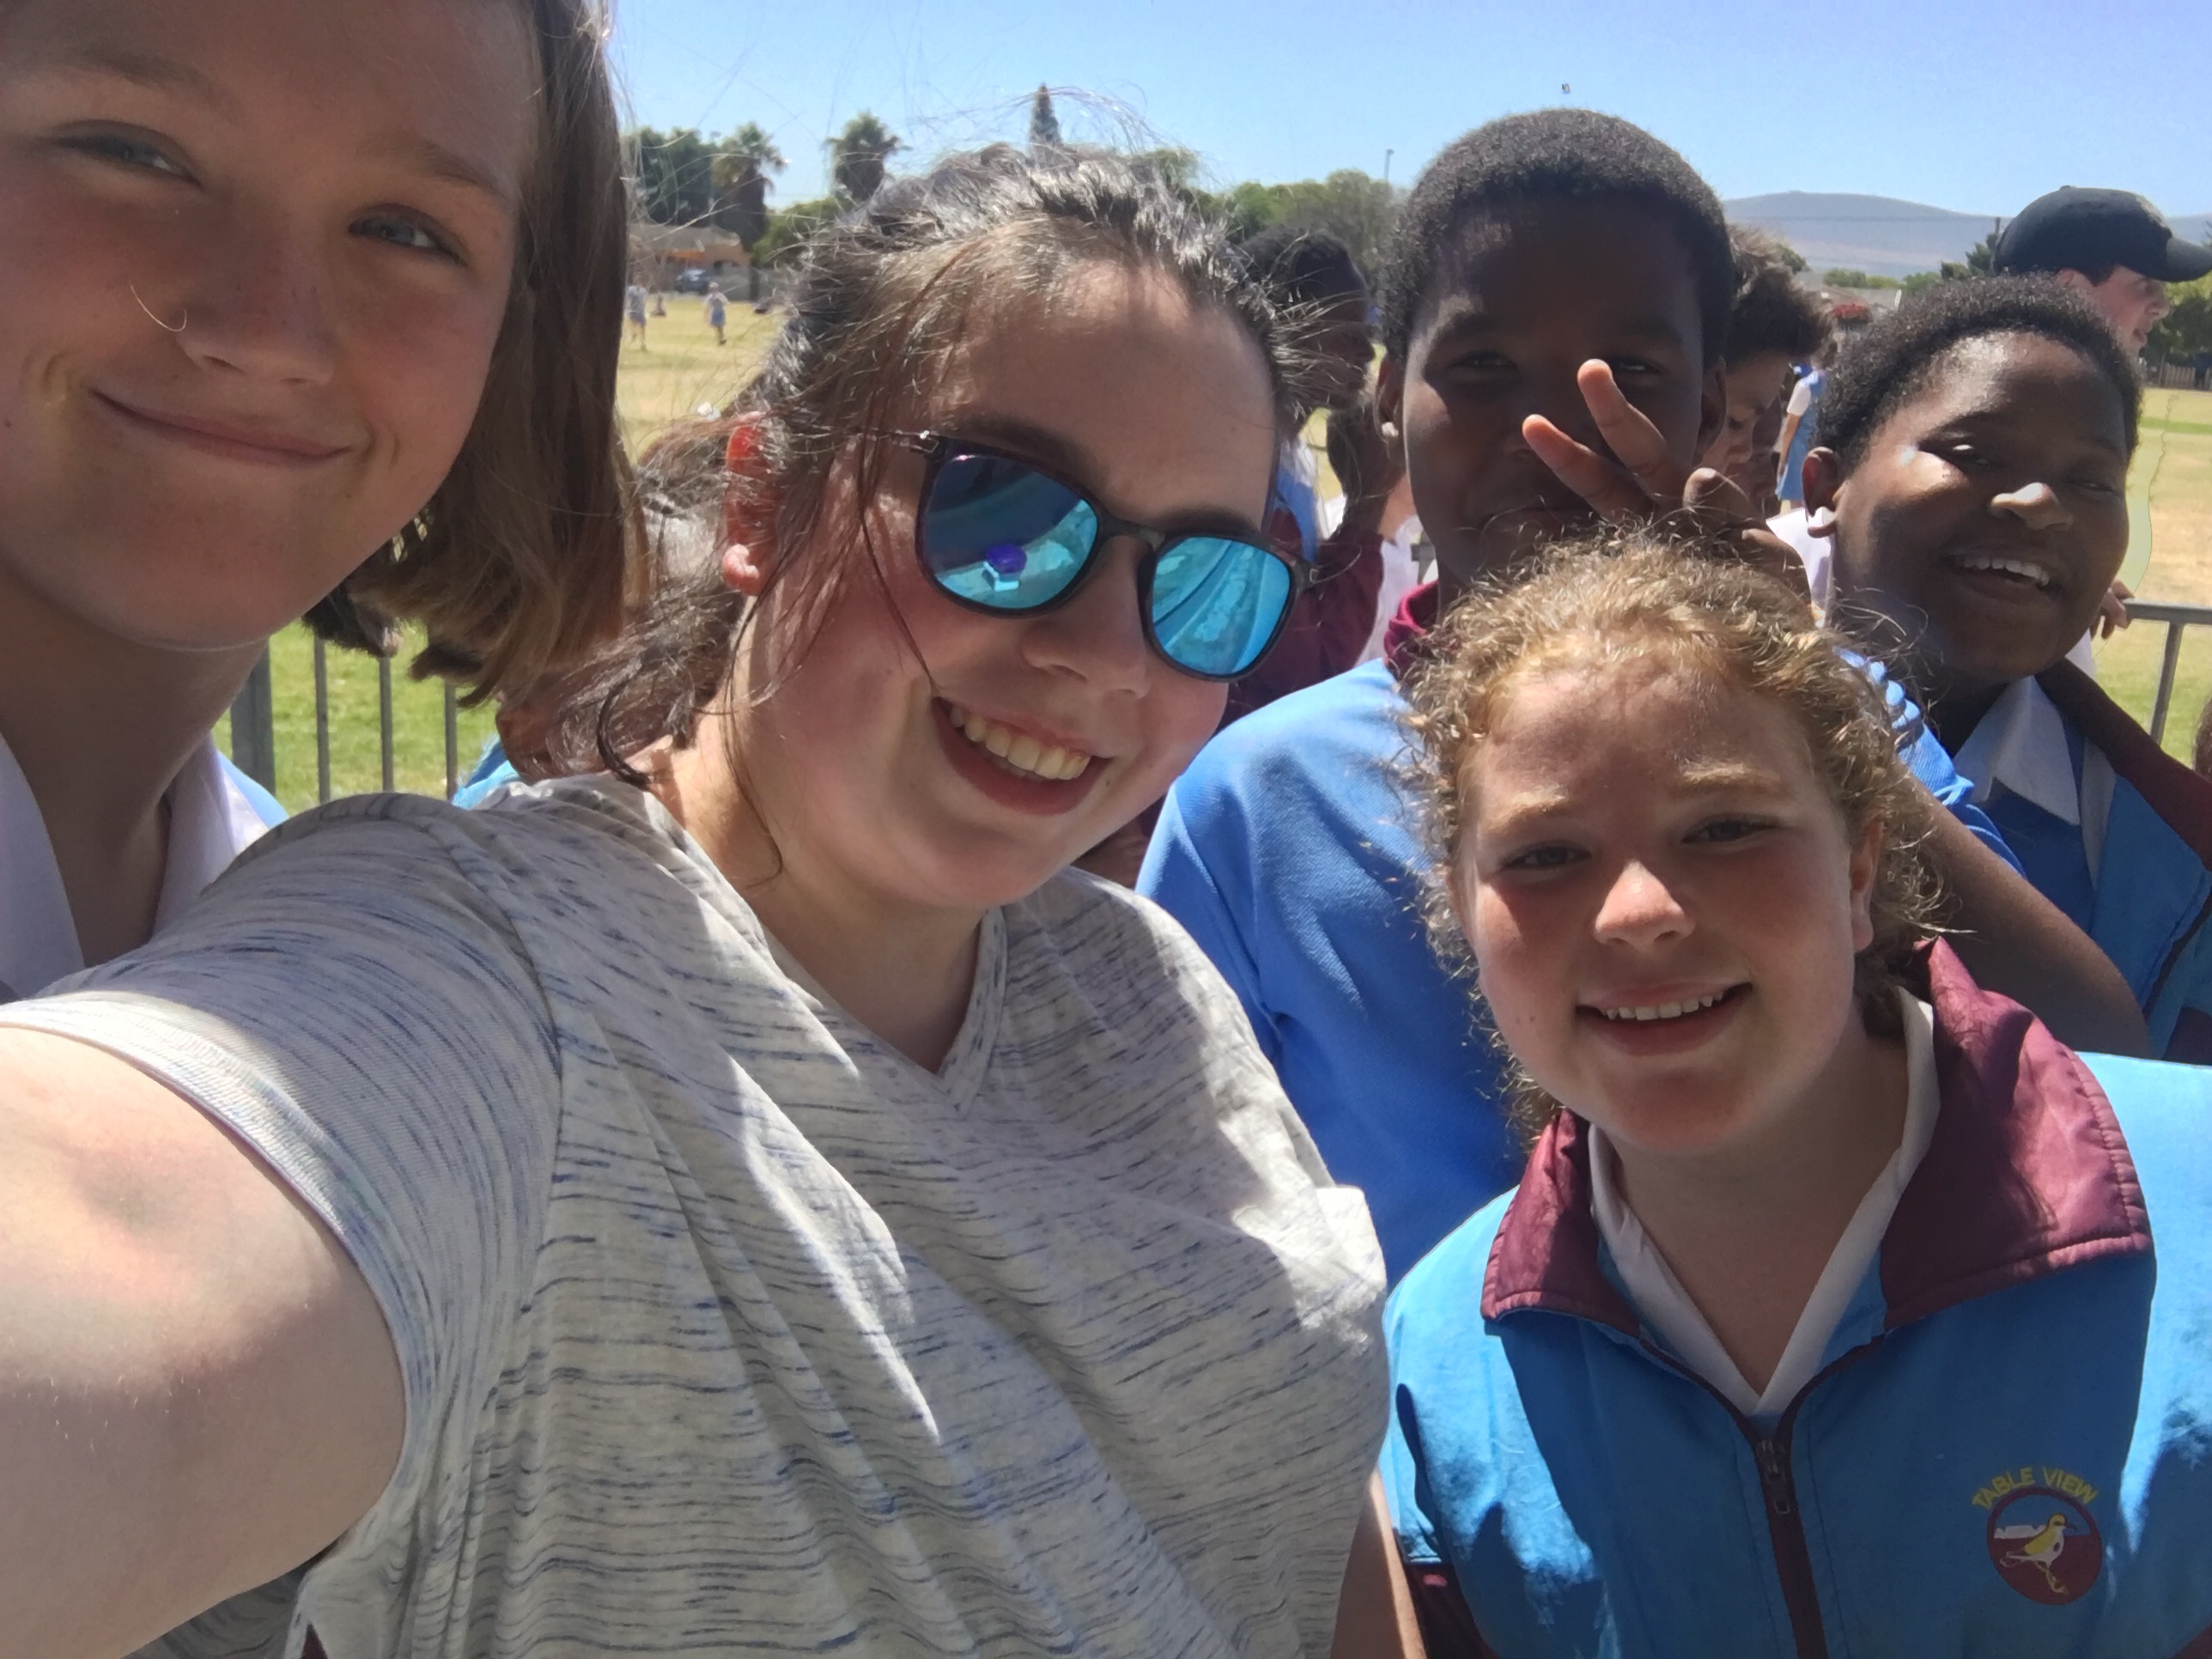 Julia Caruso in South Africa - selfie with four other people.